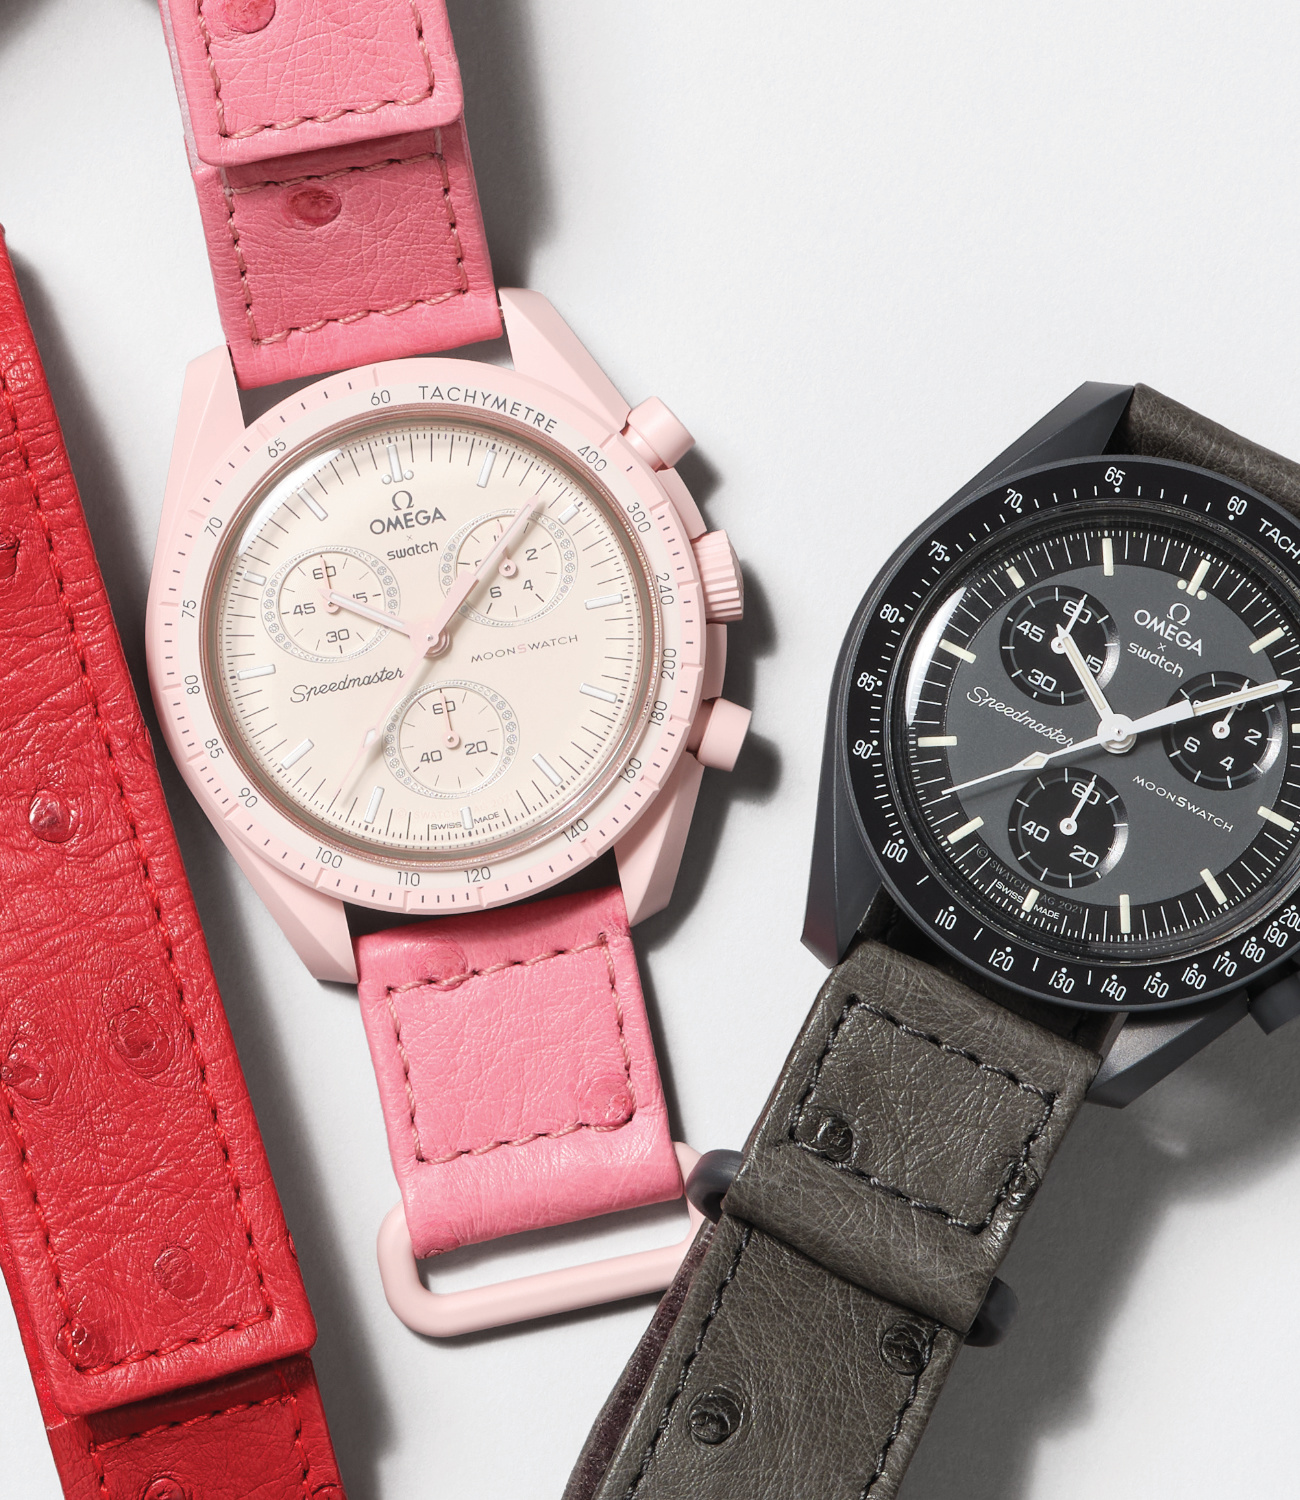 OMEGA & Swatch's Moonswatch looks luxe in ostrich leather.